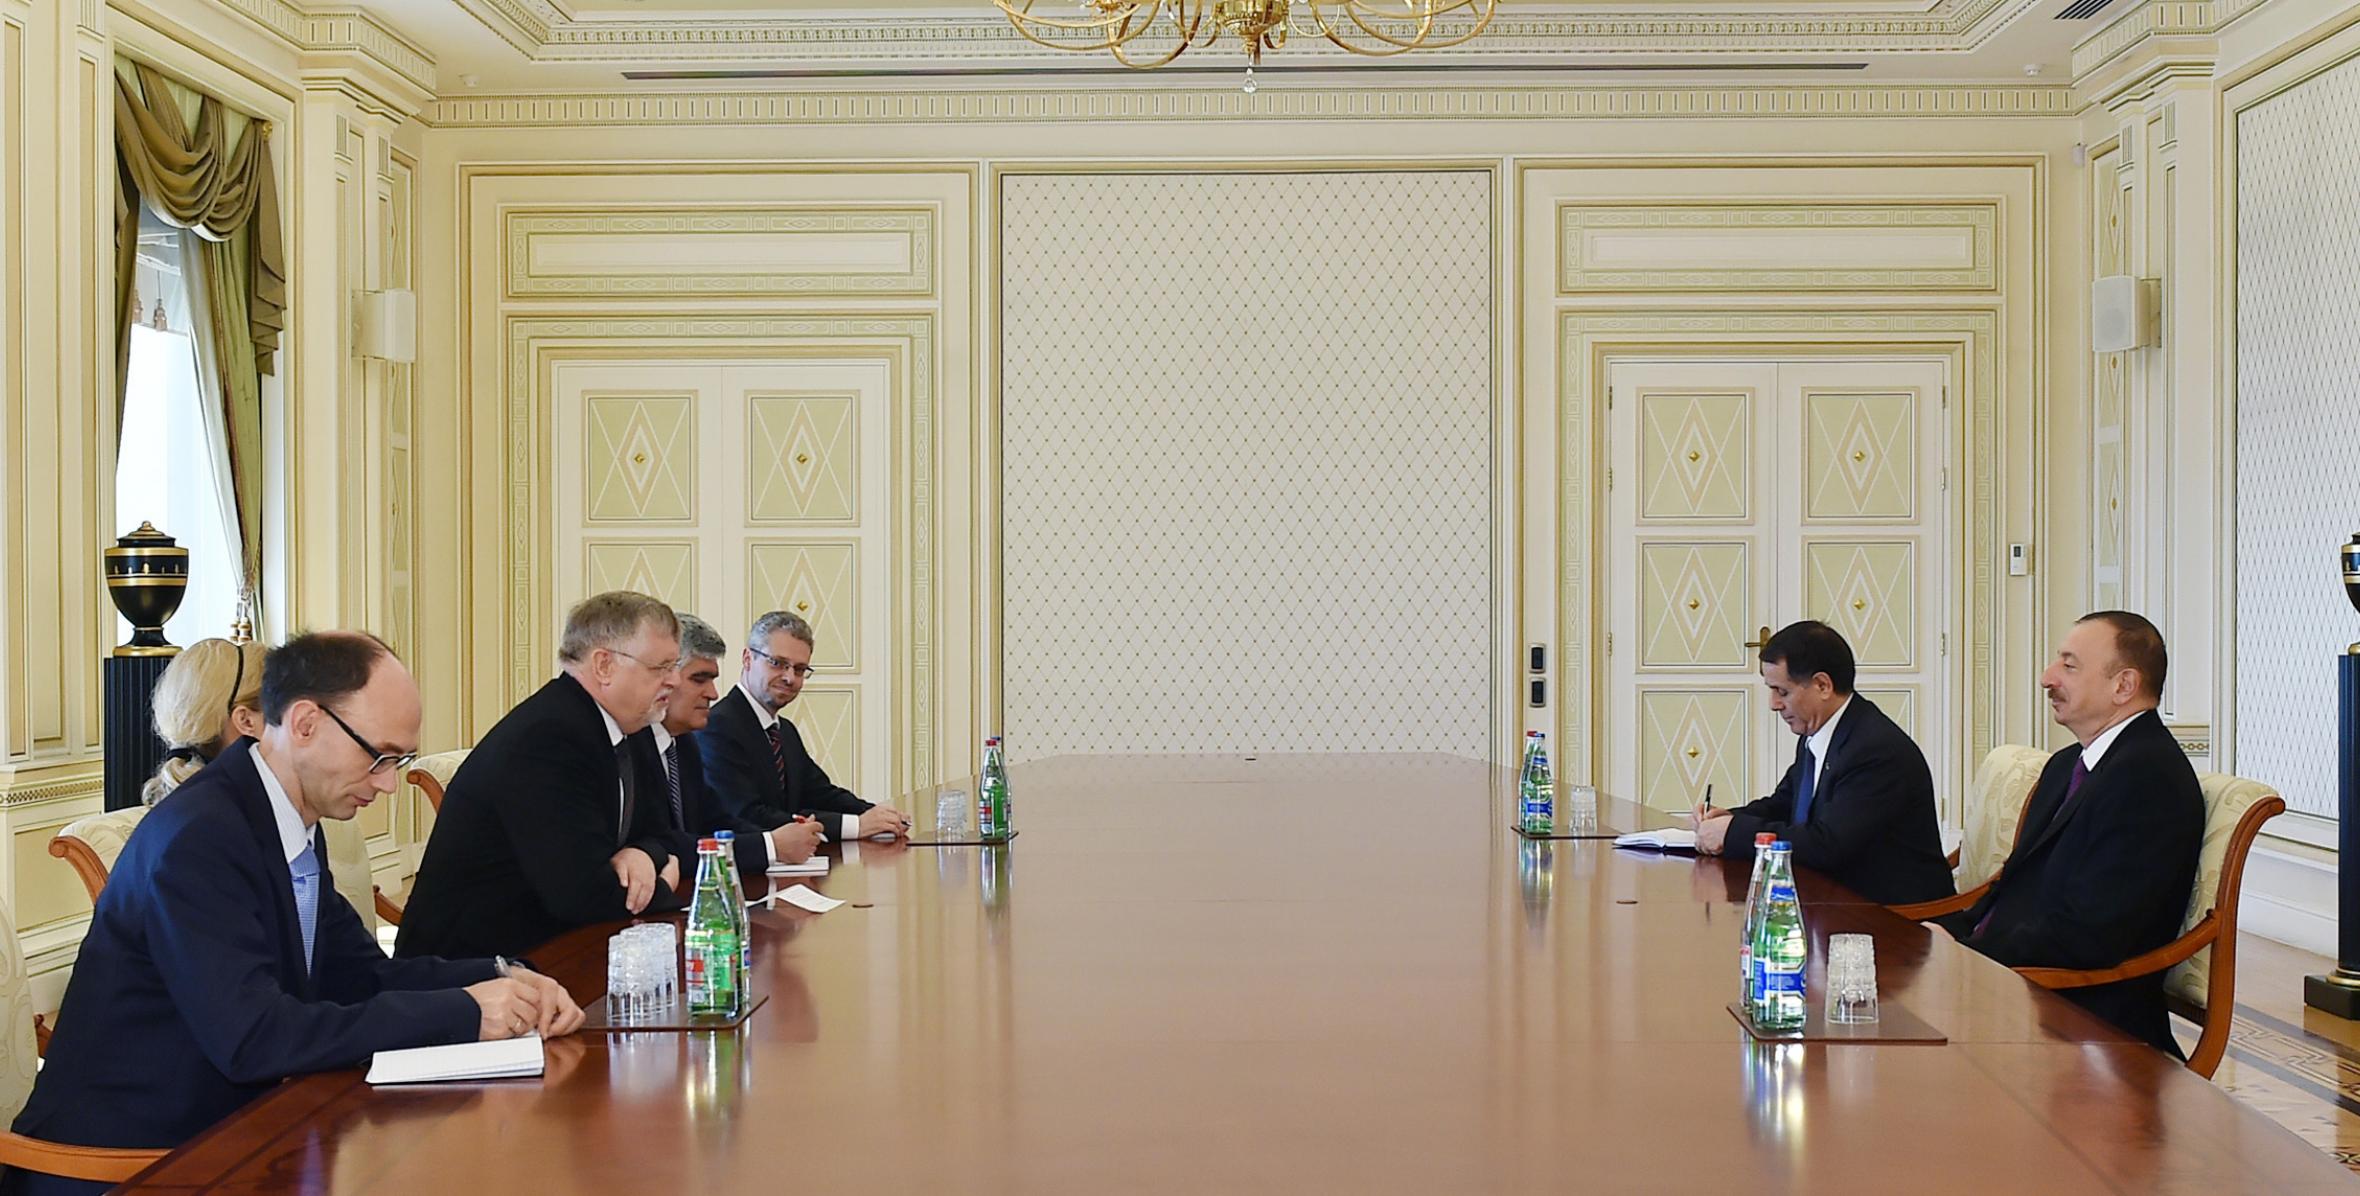 Ilham Aliyev received a delegation led by the European Union Special Representative for the South Caucasus